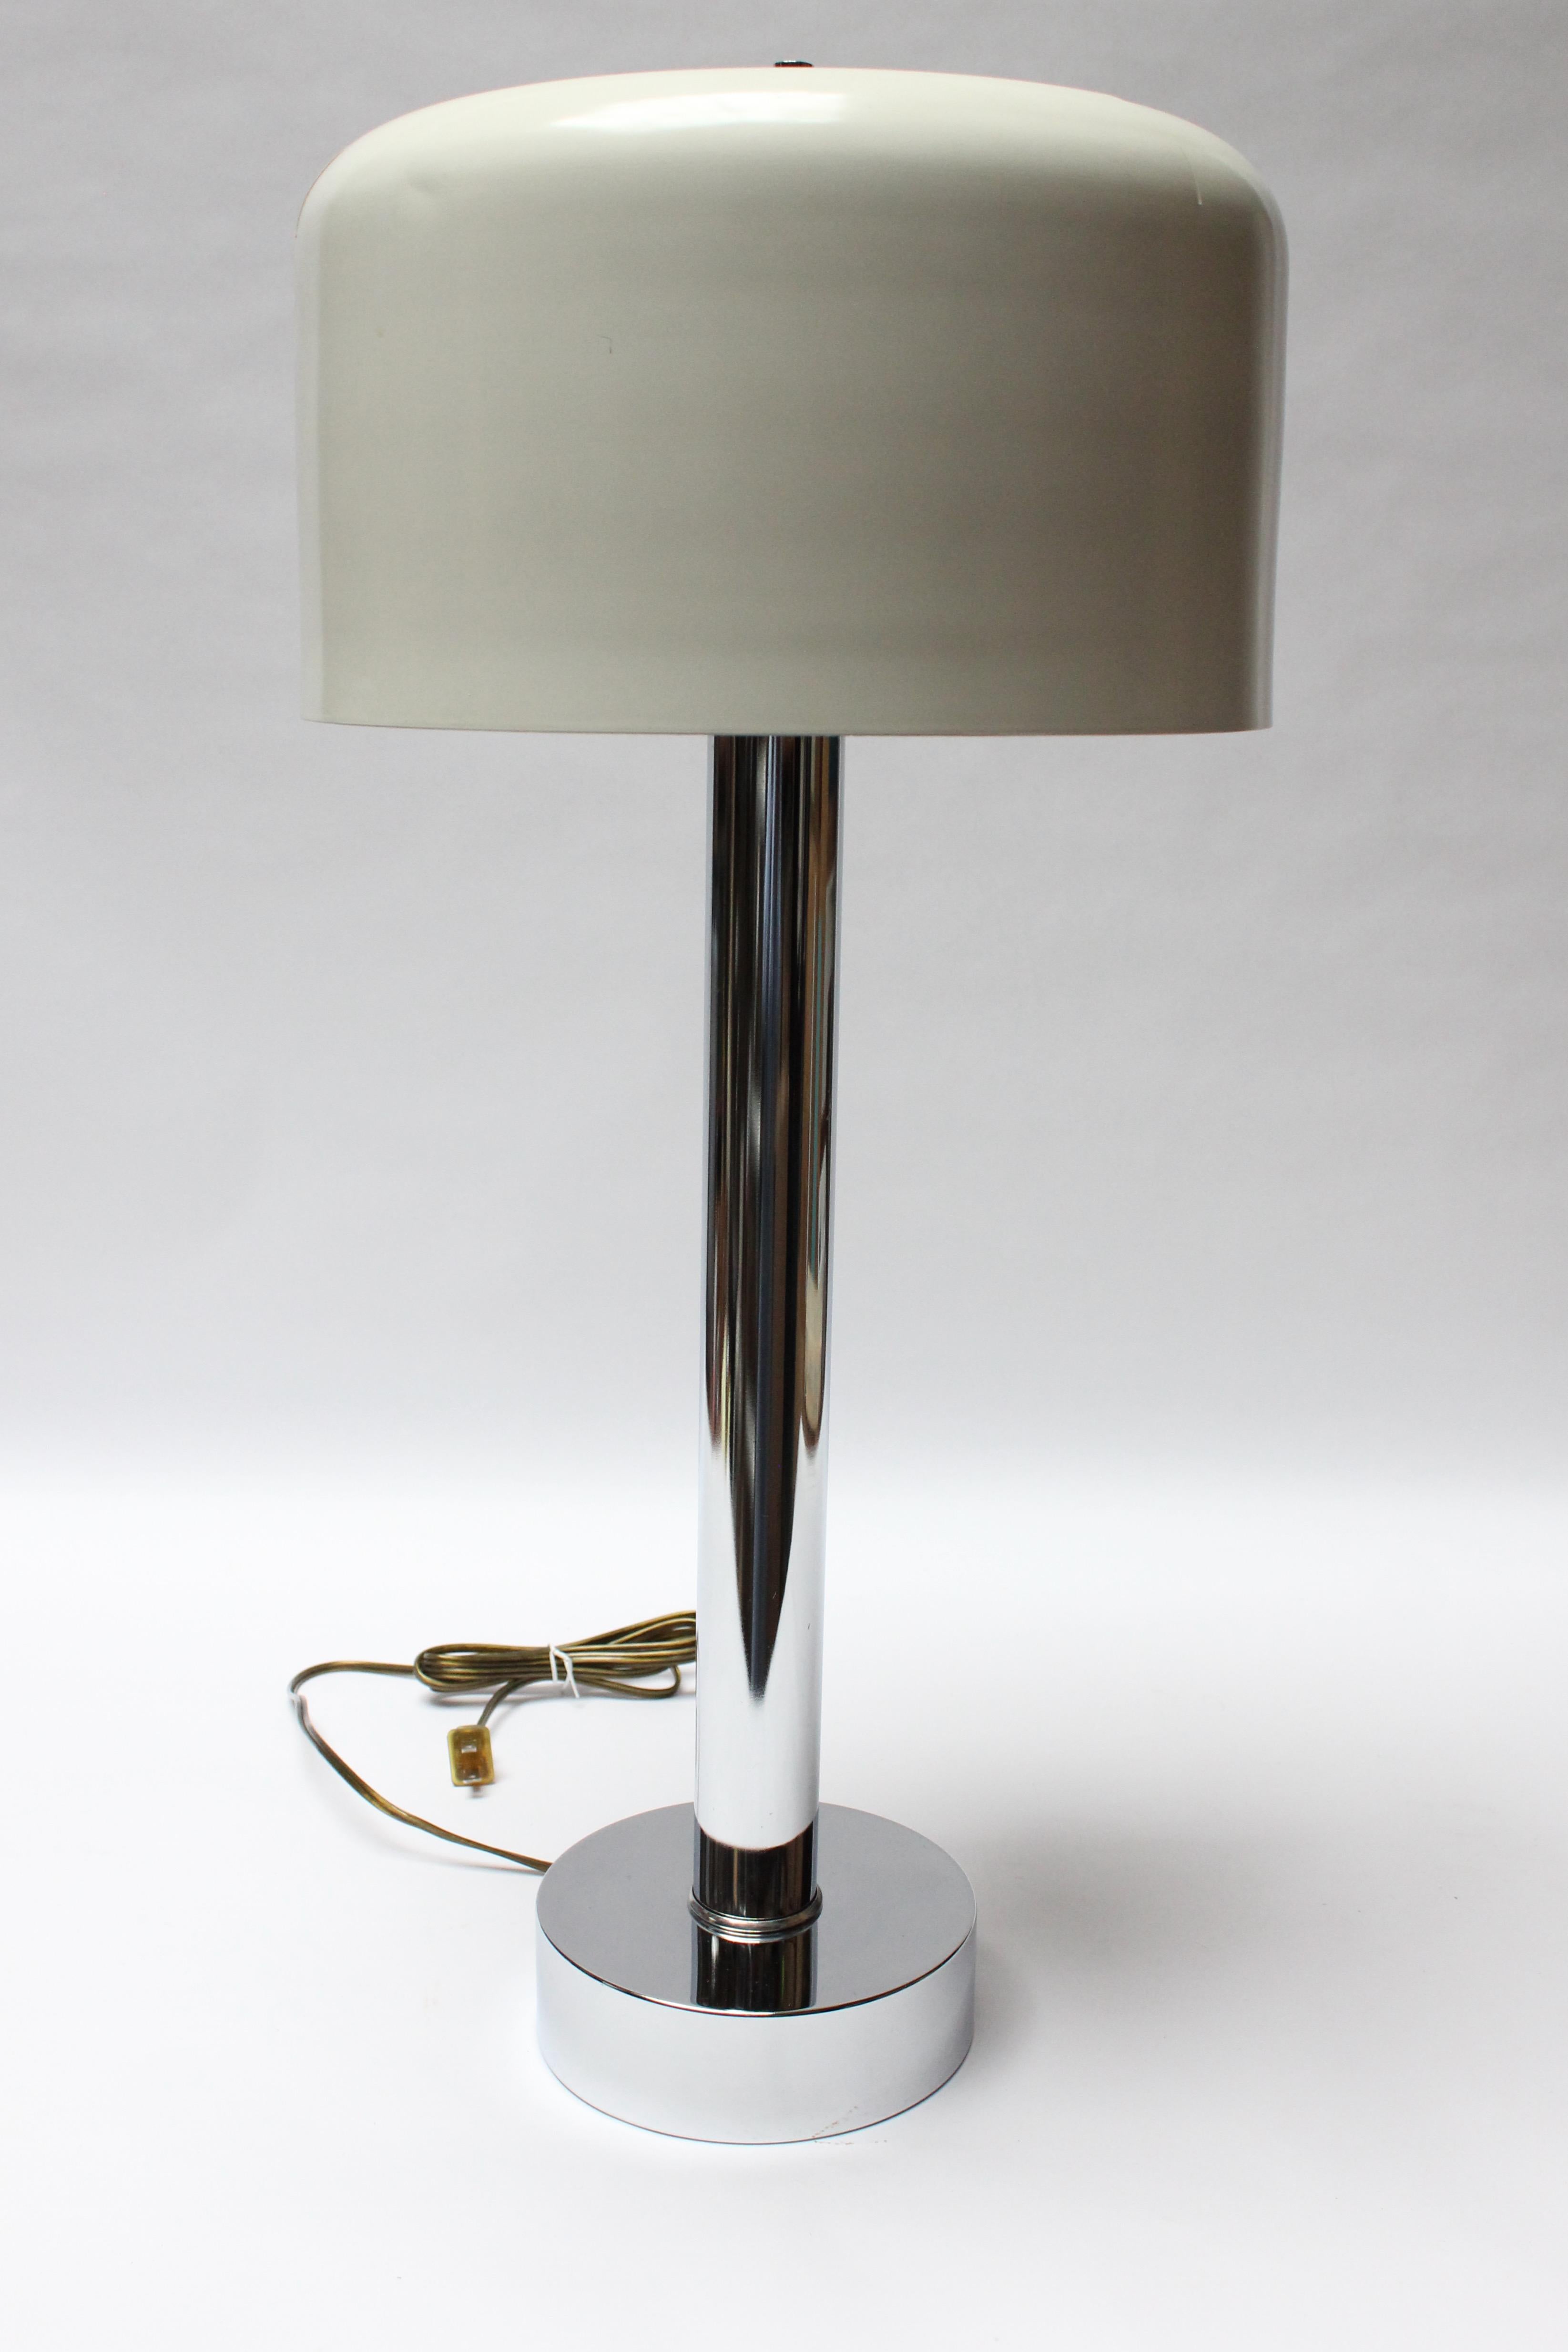 Vintage table lamp composed of a tubular chrome pillar supported by a round base with the original white lacquered shade. Similar to the 'Coupe' design by the Italian designer, Joe Colombo, the shade is lacquered aluminum with two slits reflecting